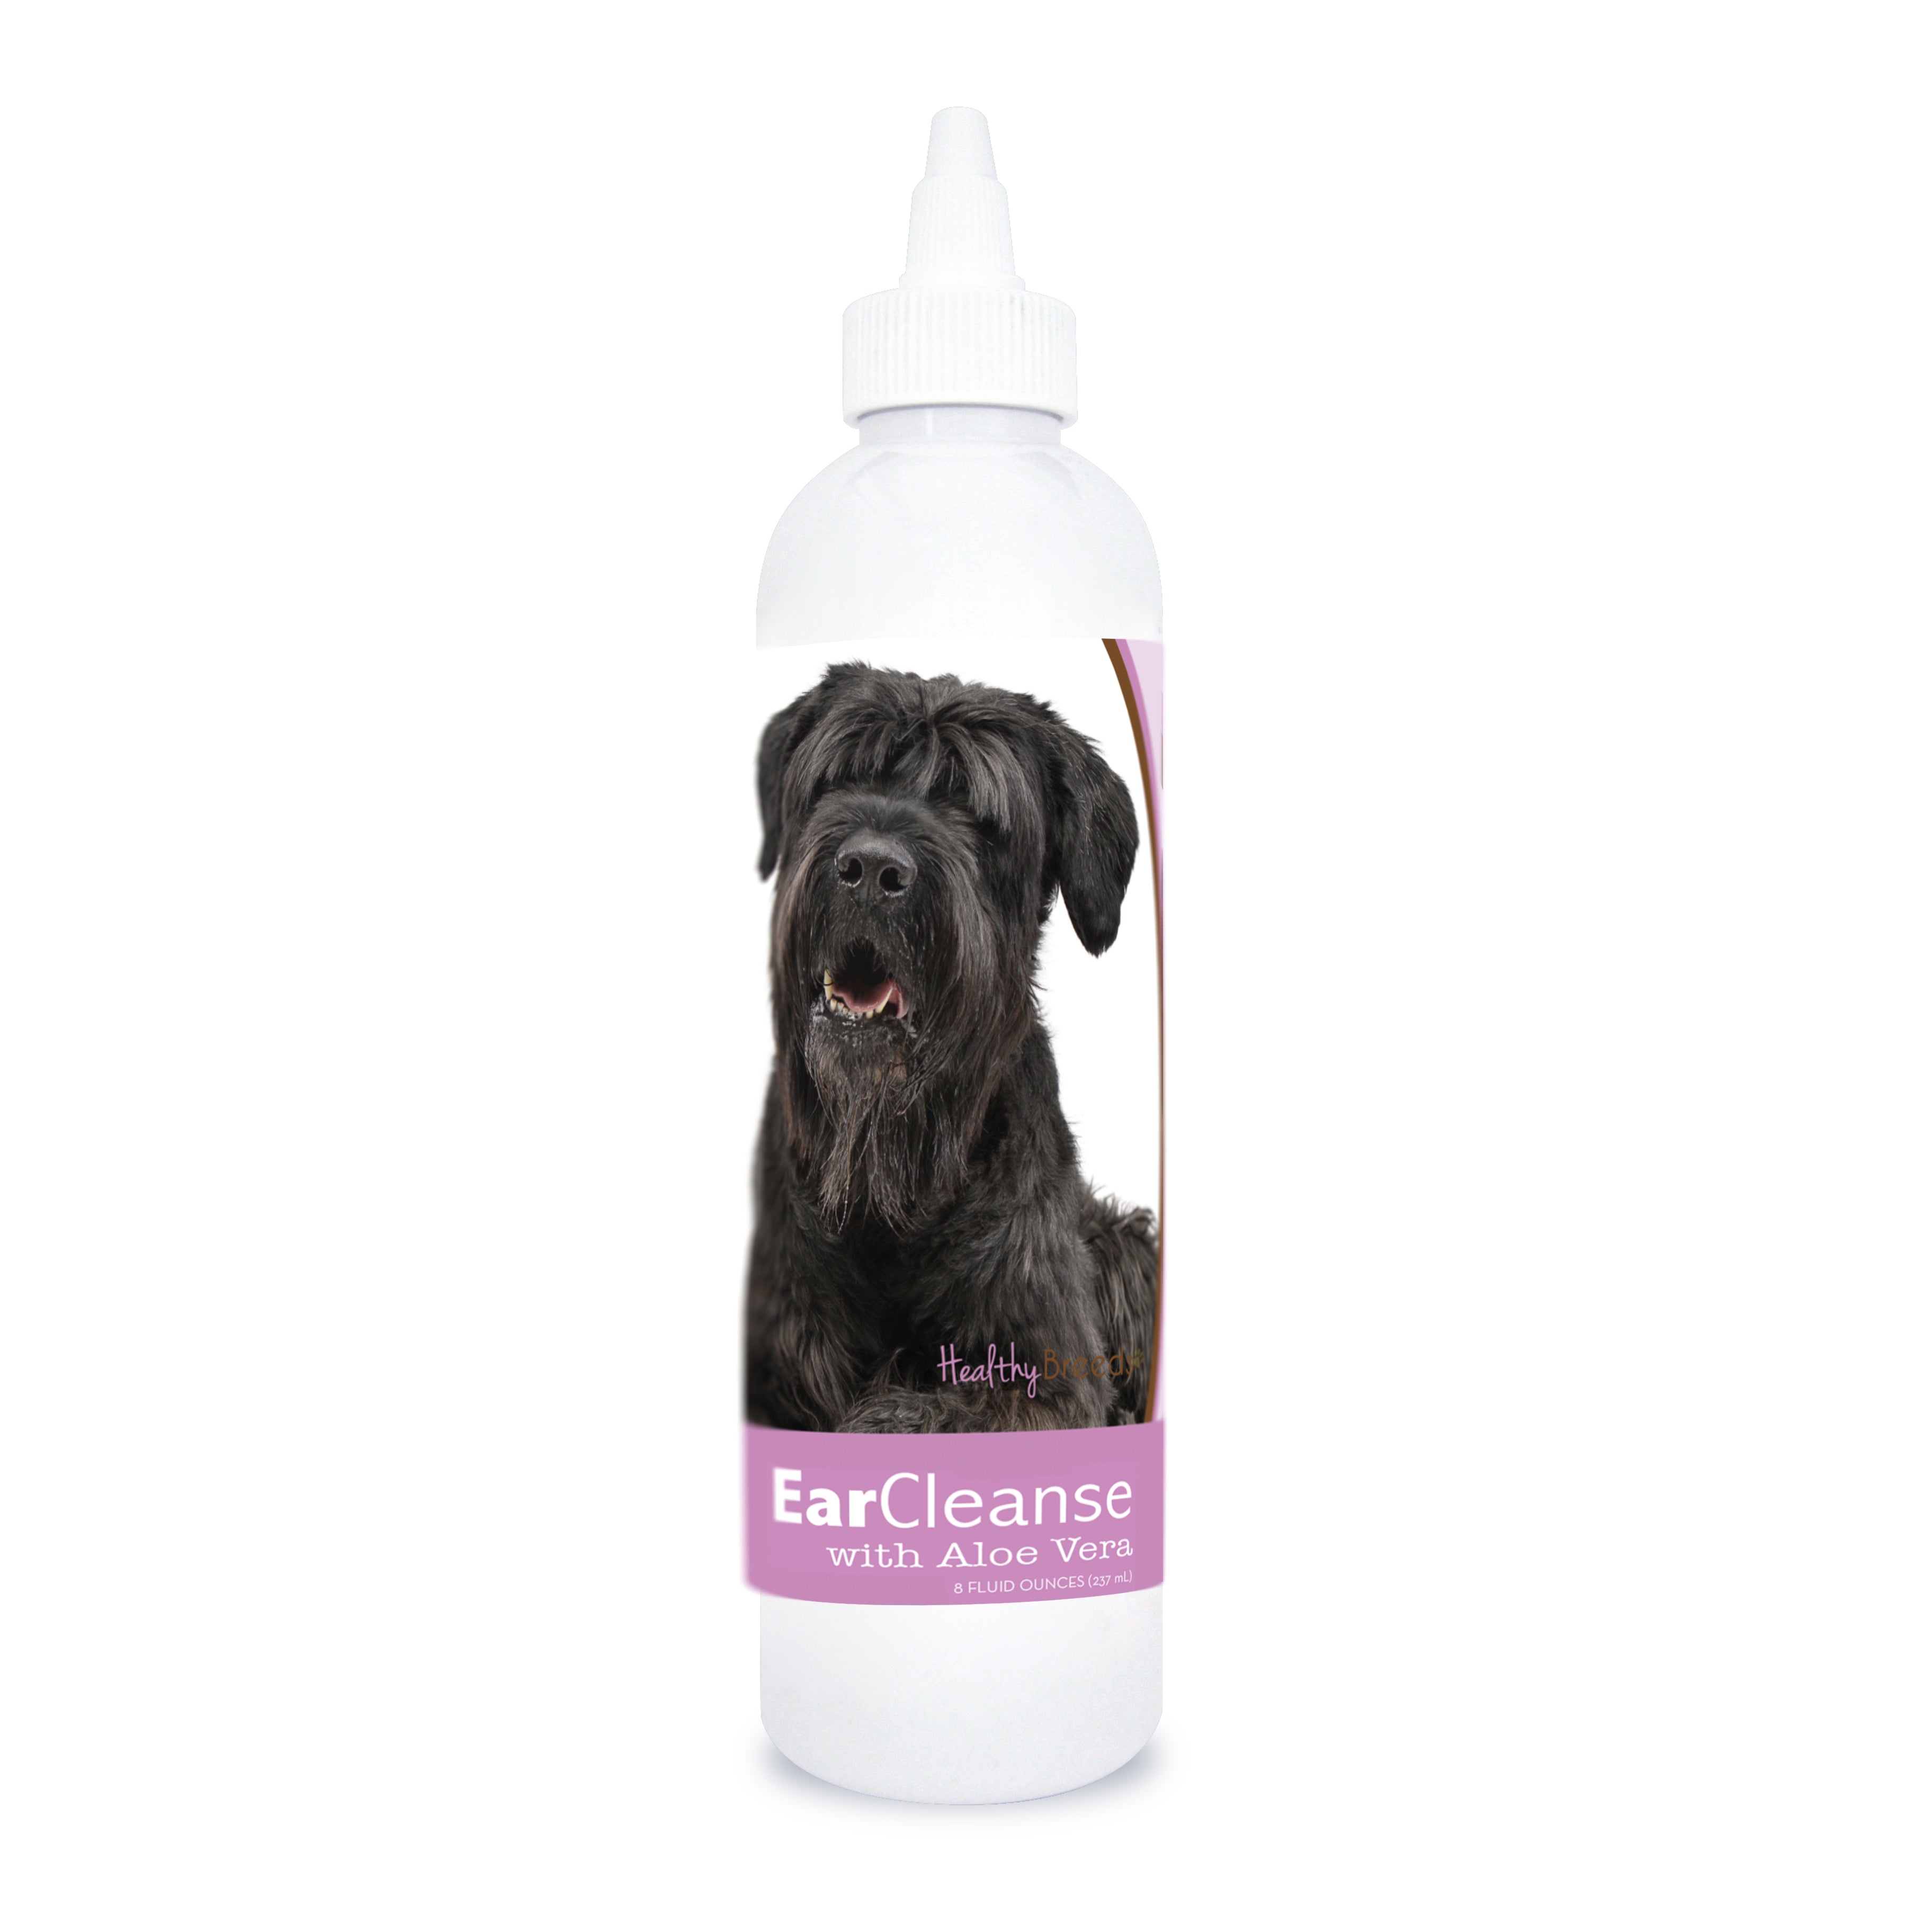 Black Russian Terrier Ear Cleanse with Aloe Vera Sweet Pea and Vanilla 8 oz